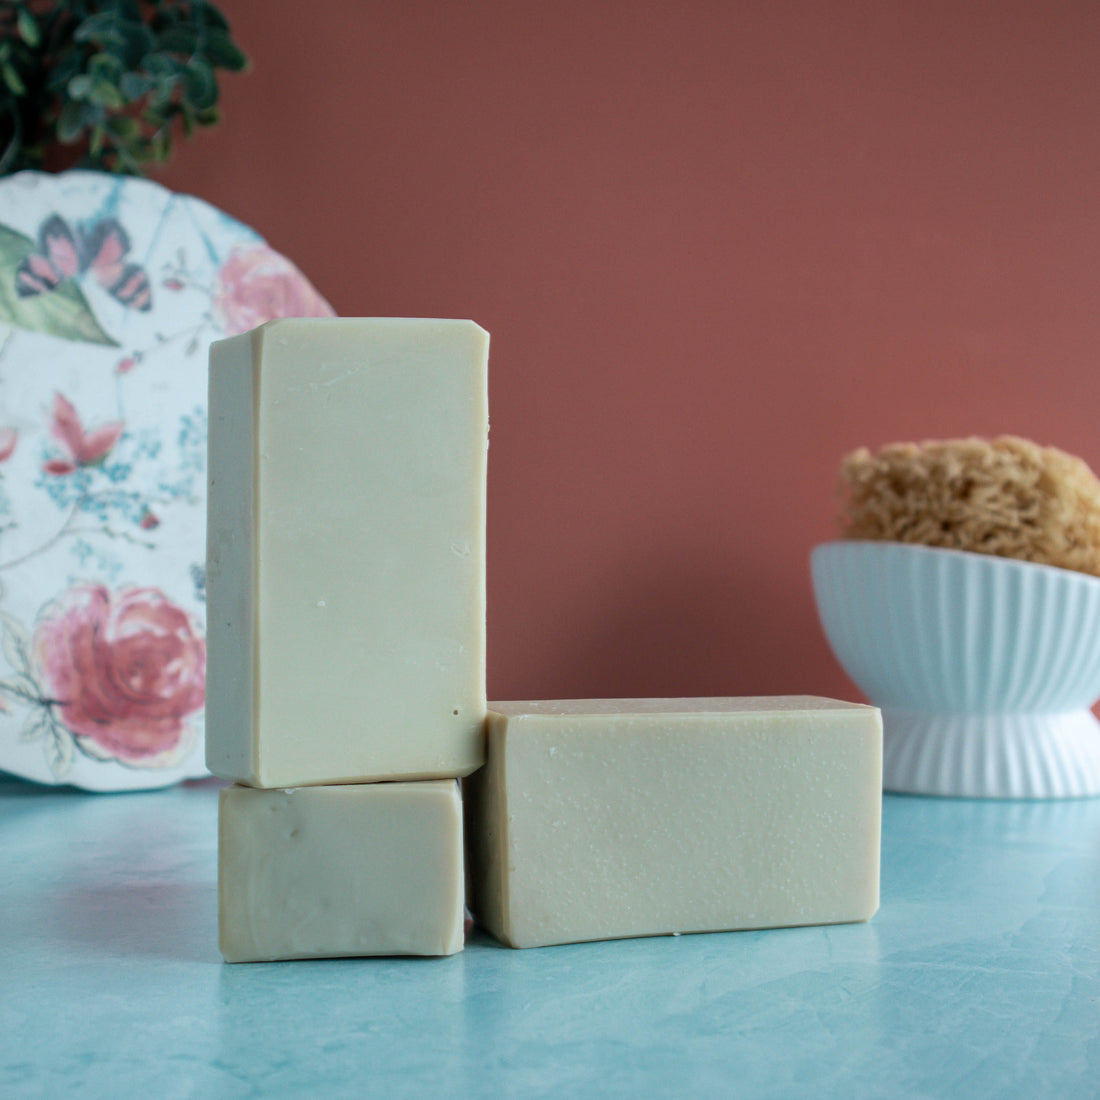 3 bars of creamy tan soap are in the foreground, 2 stacked on top of each other. there is a pretty floral plate in the back left corner and a sponge in a white dish in the back right. The background is a lovely coral color and a seafoam green base.